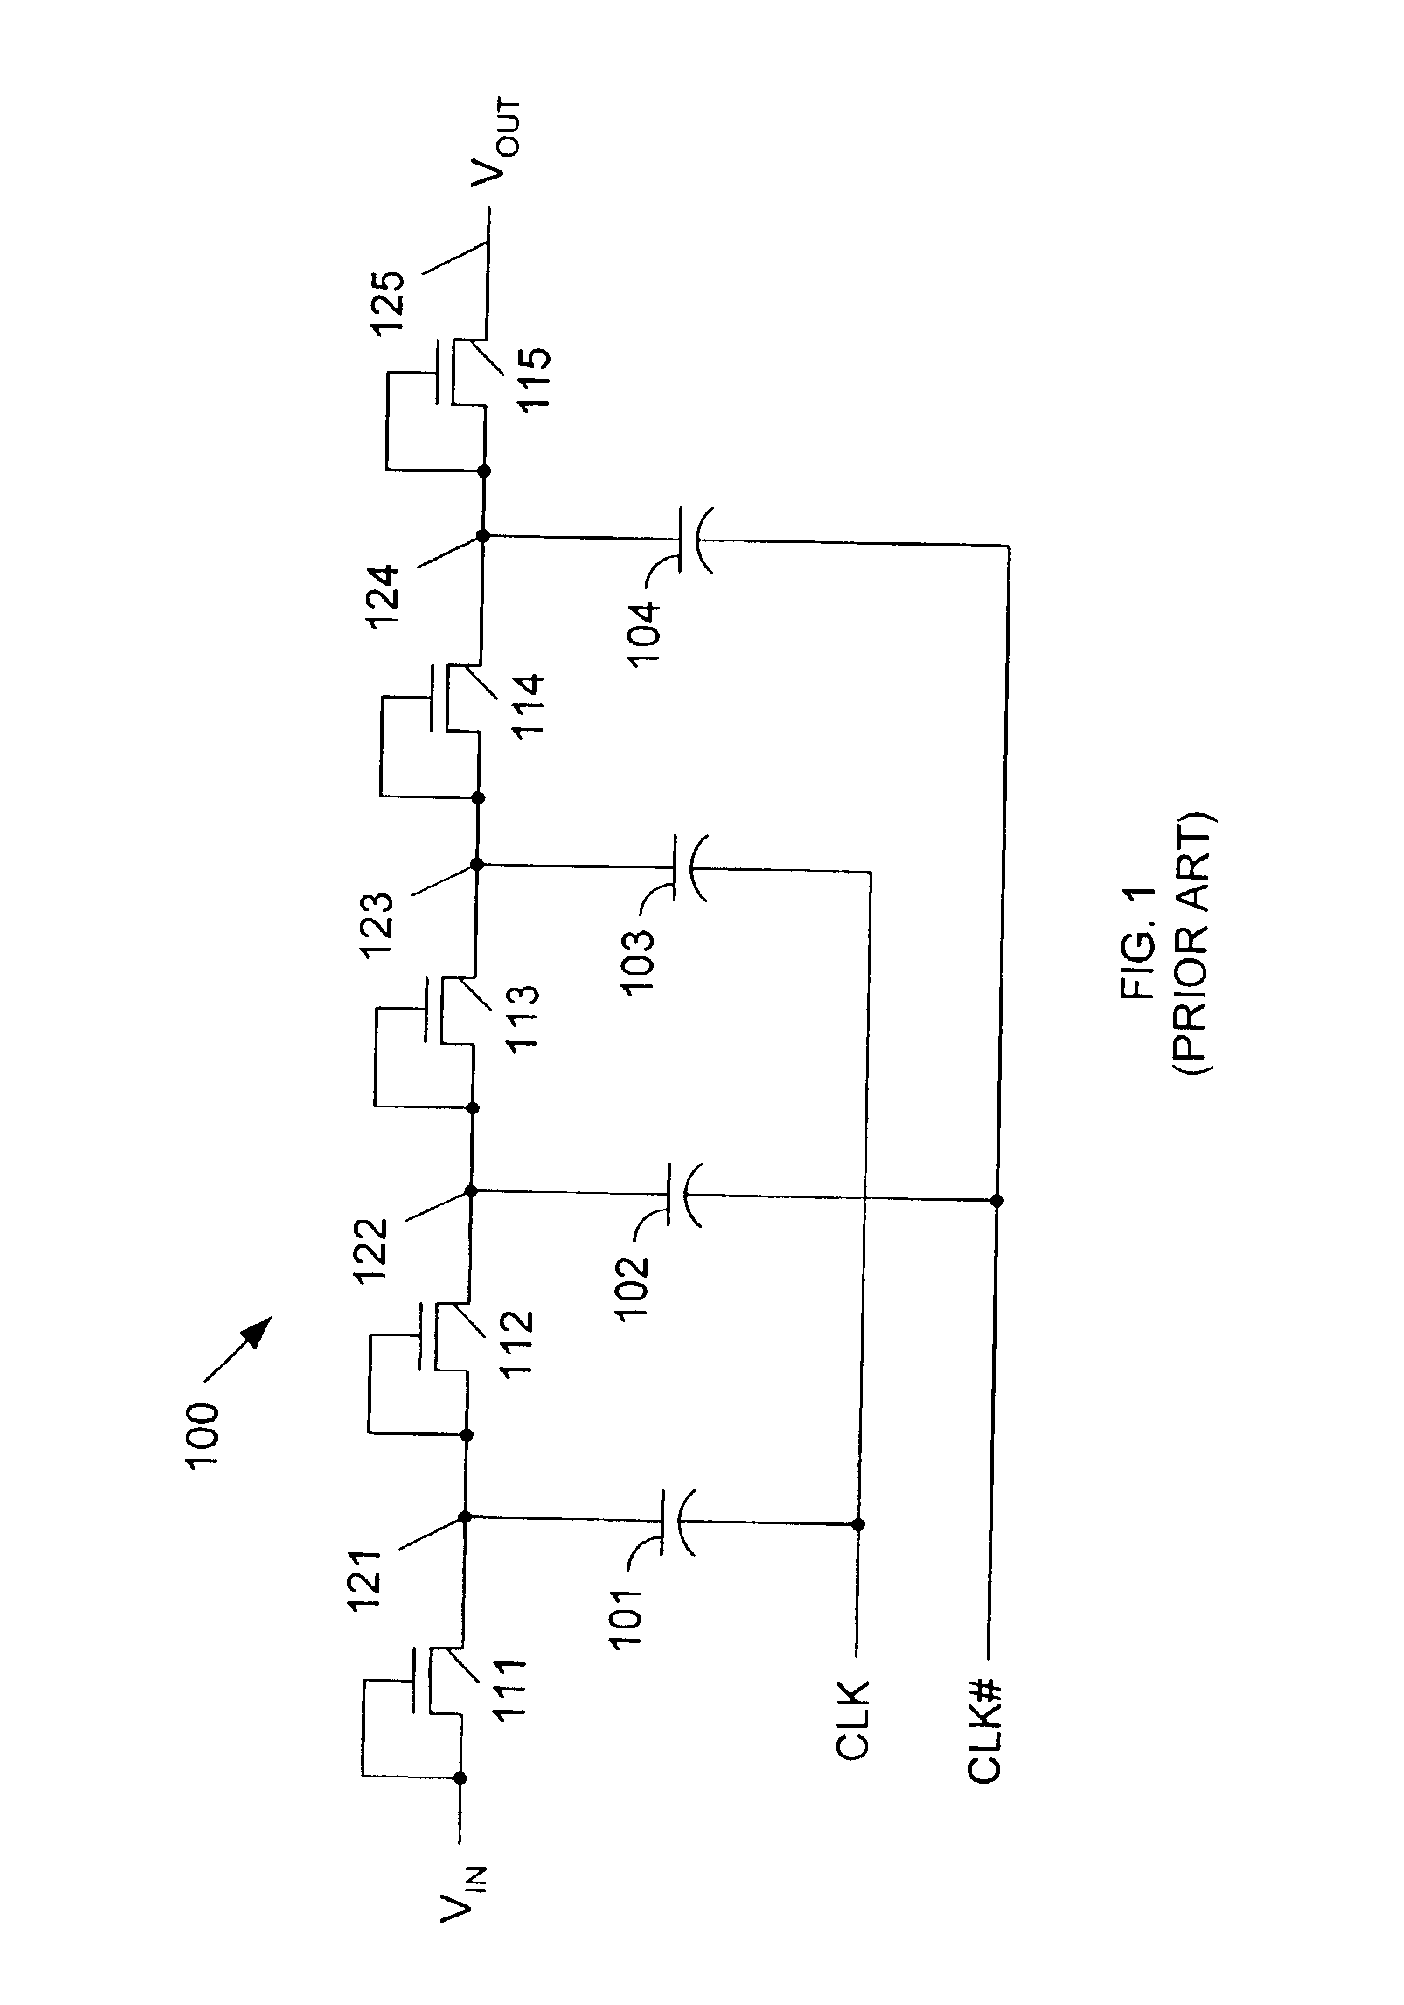 Triple-well charge pump stage with no threshold voltage back-bias effect